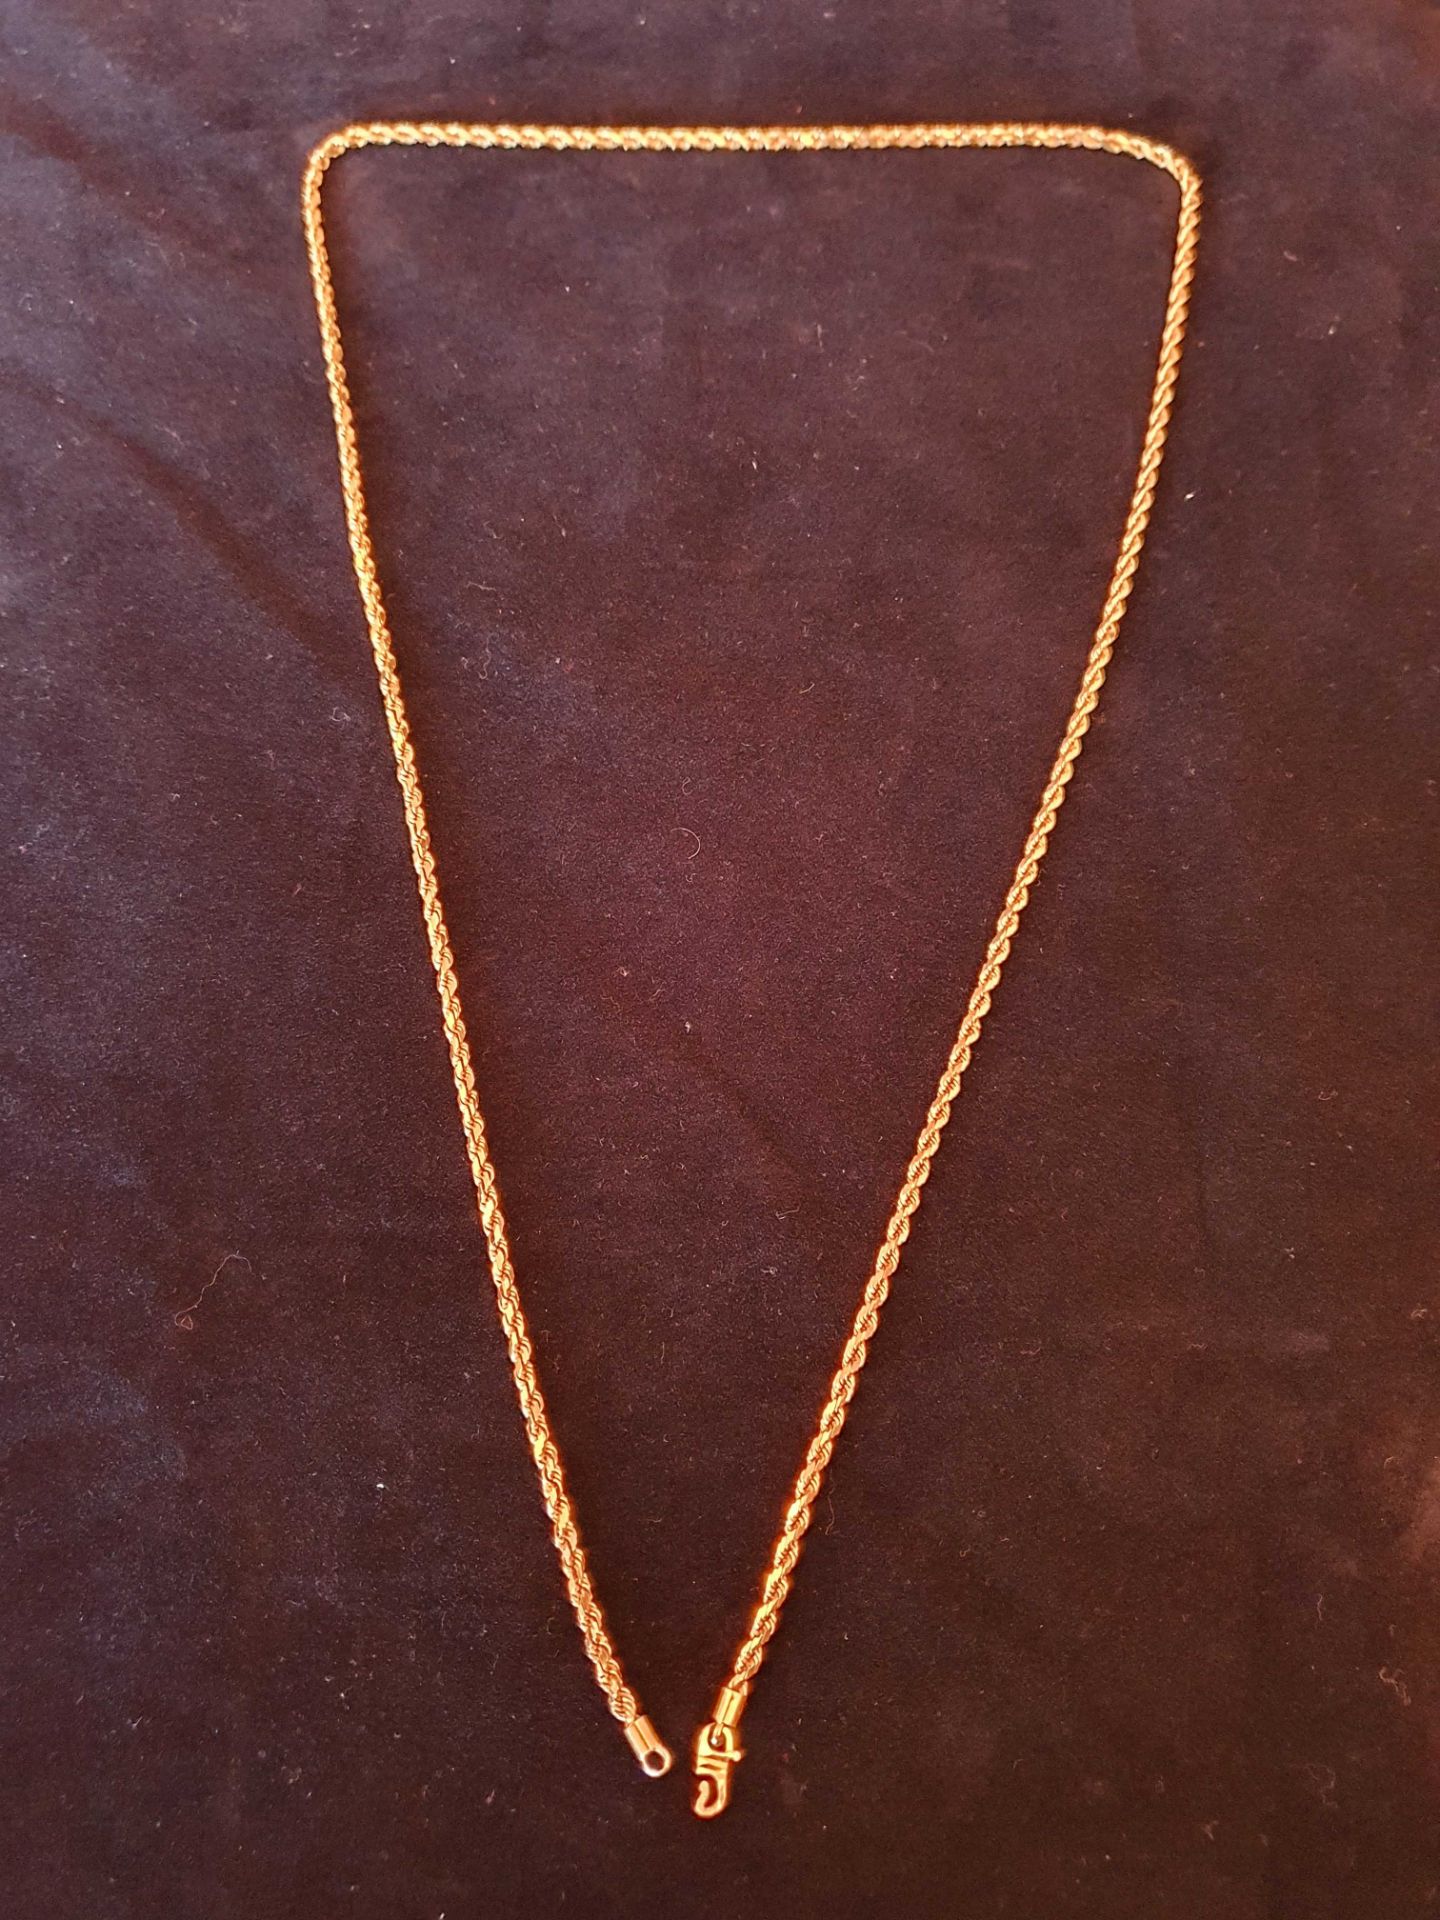 76cm Gold Rope Link Necklace with Hook Clasp. 35.310 grams